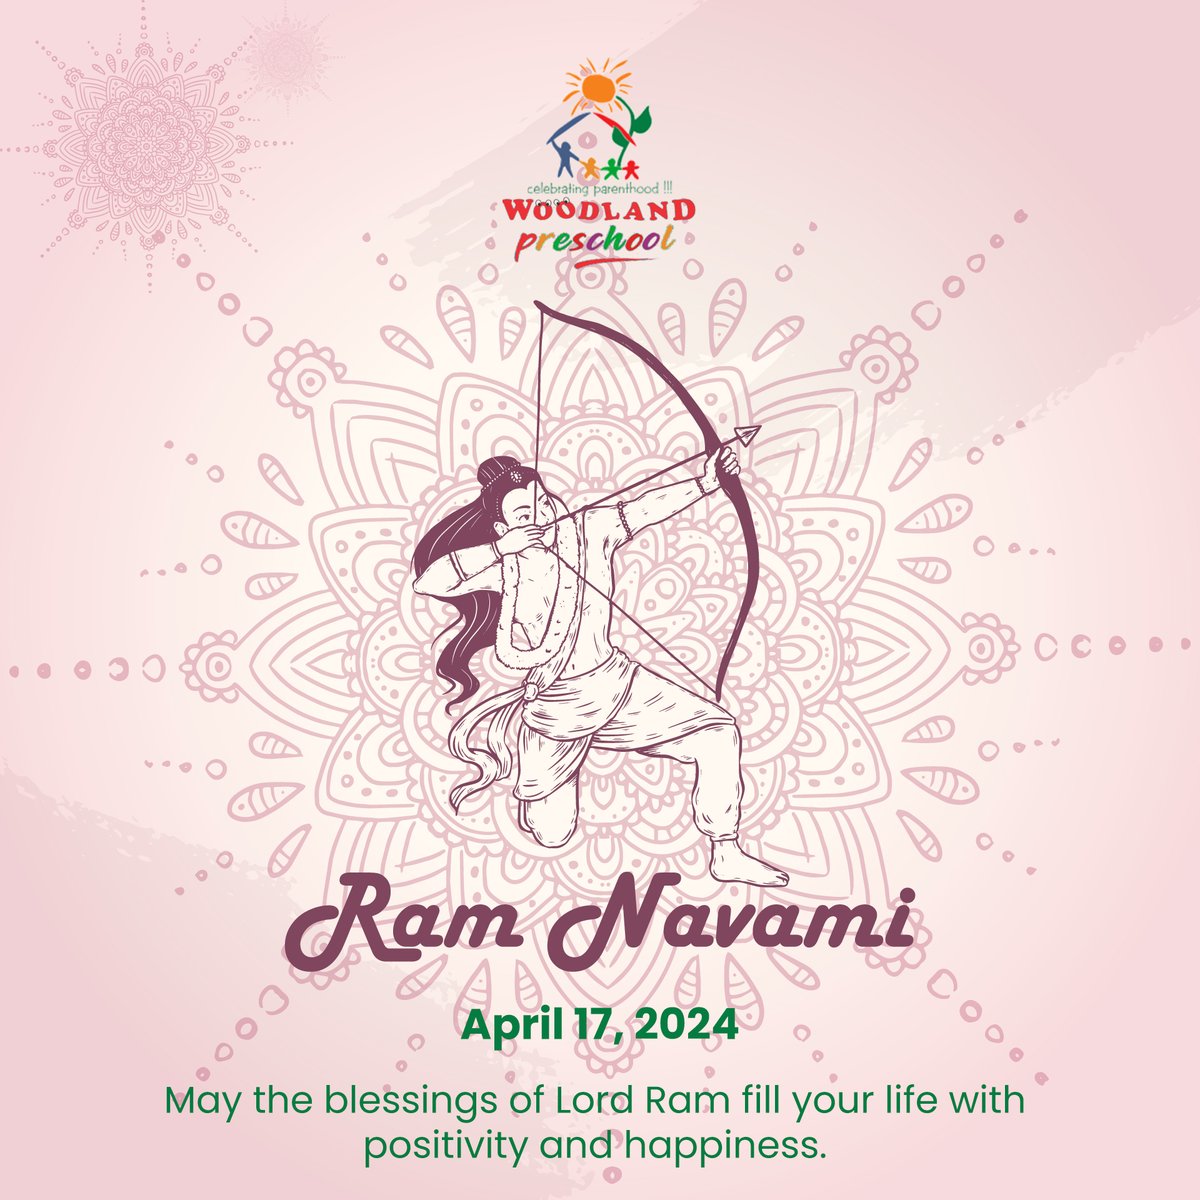 May the victory of good over evil, as depicted in the life of Lord Rama, inspire us to fight our own inner battles✨🌺

#BlessingsOfRama #HappyRamNavami #WoodlandPreschool #PreSchool #HoshiarpurDiaries #Punjab #Education #SchoolLife #School #Learning #LearningThroughPlay